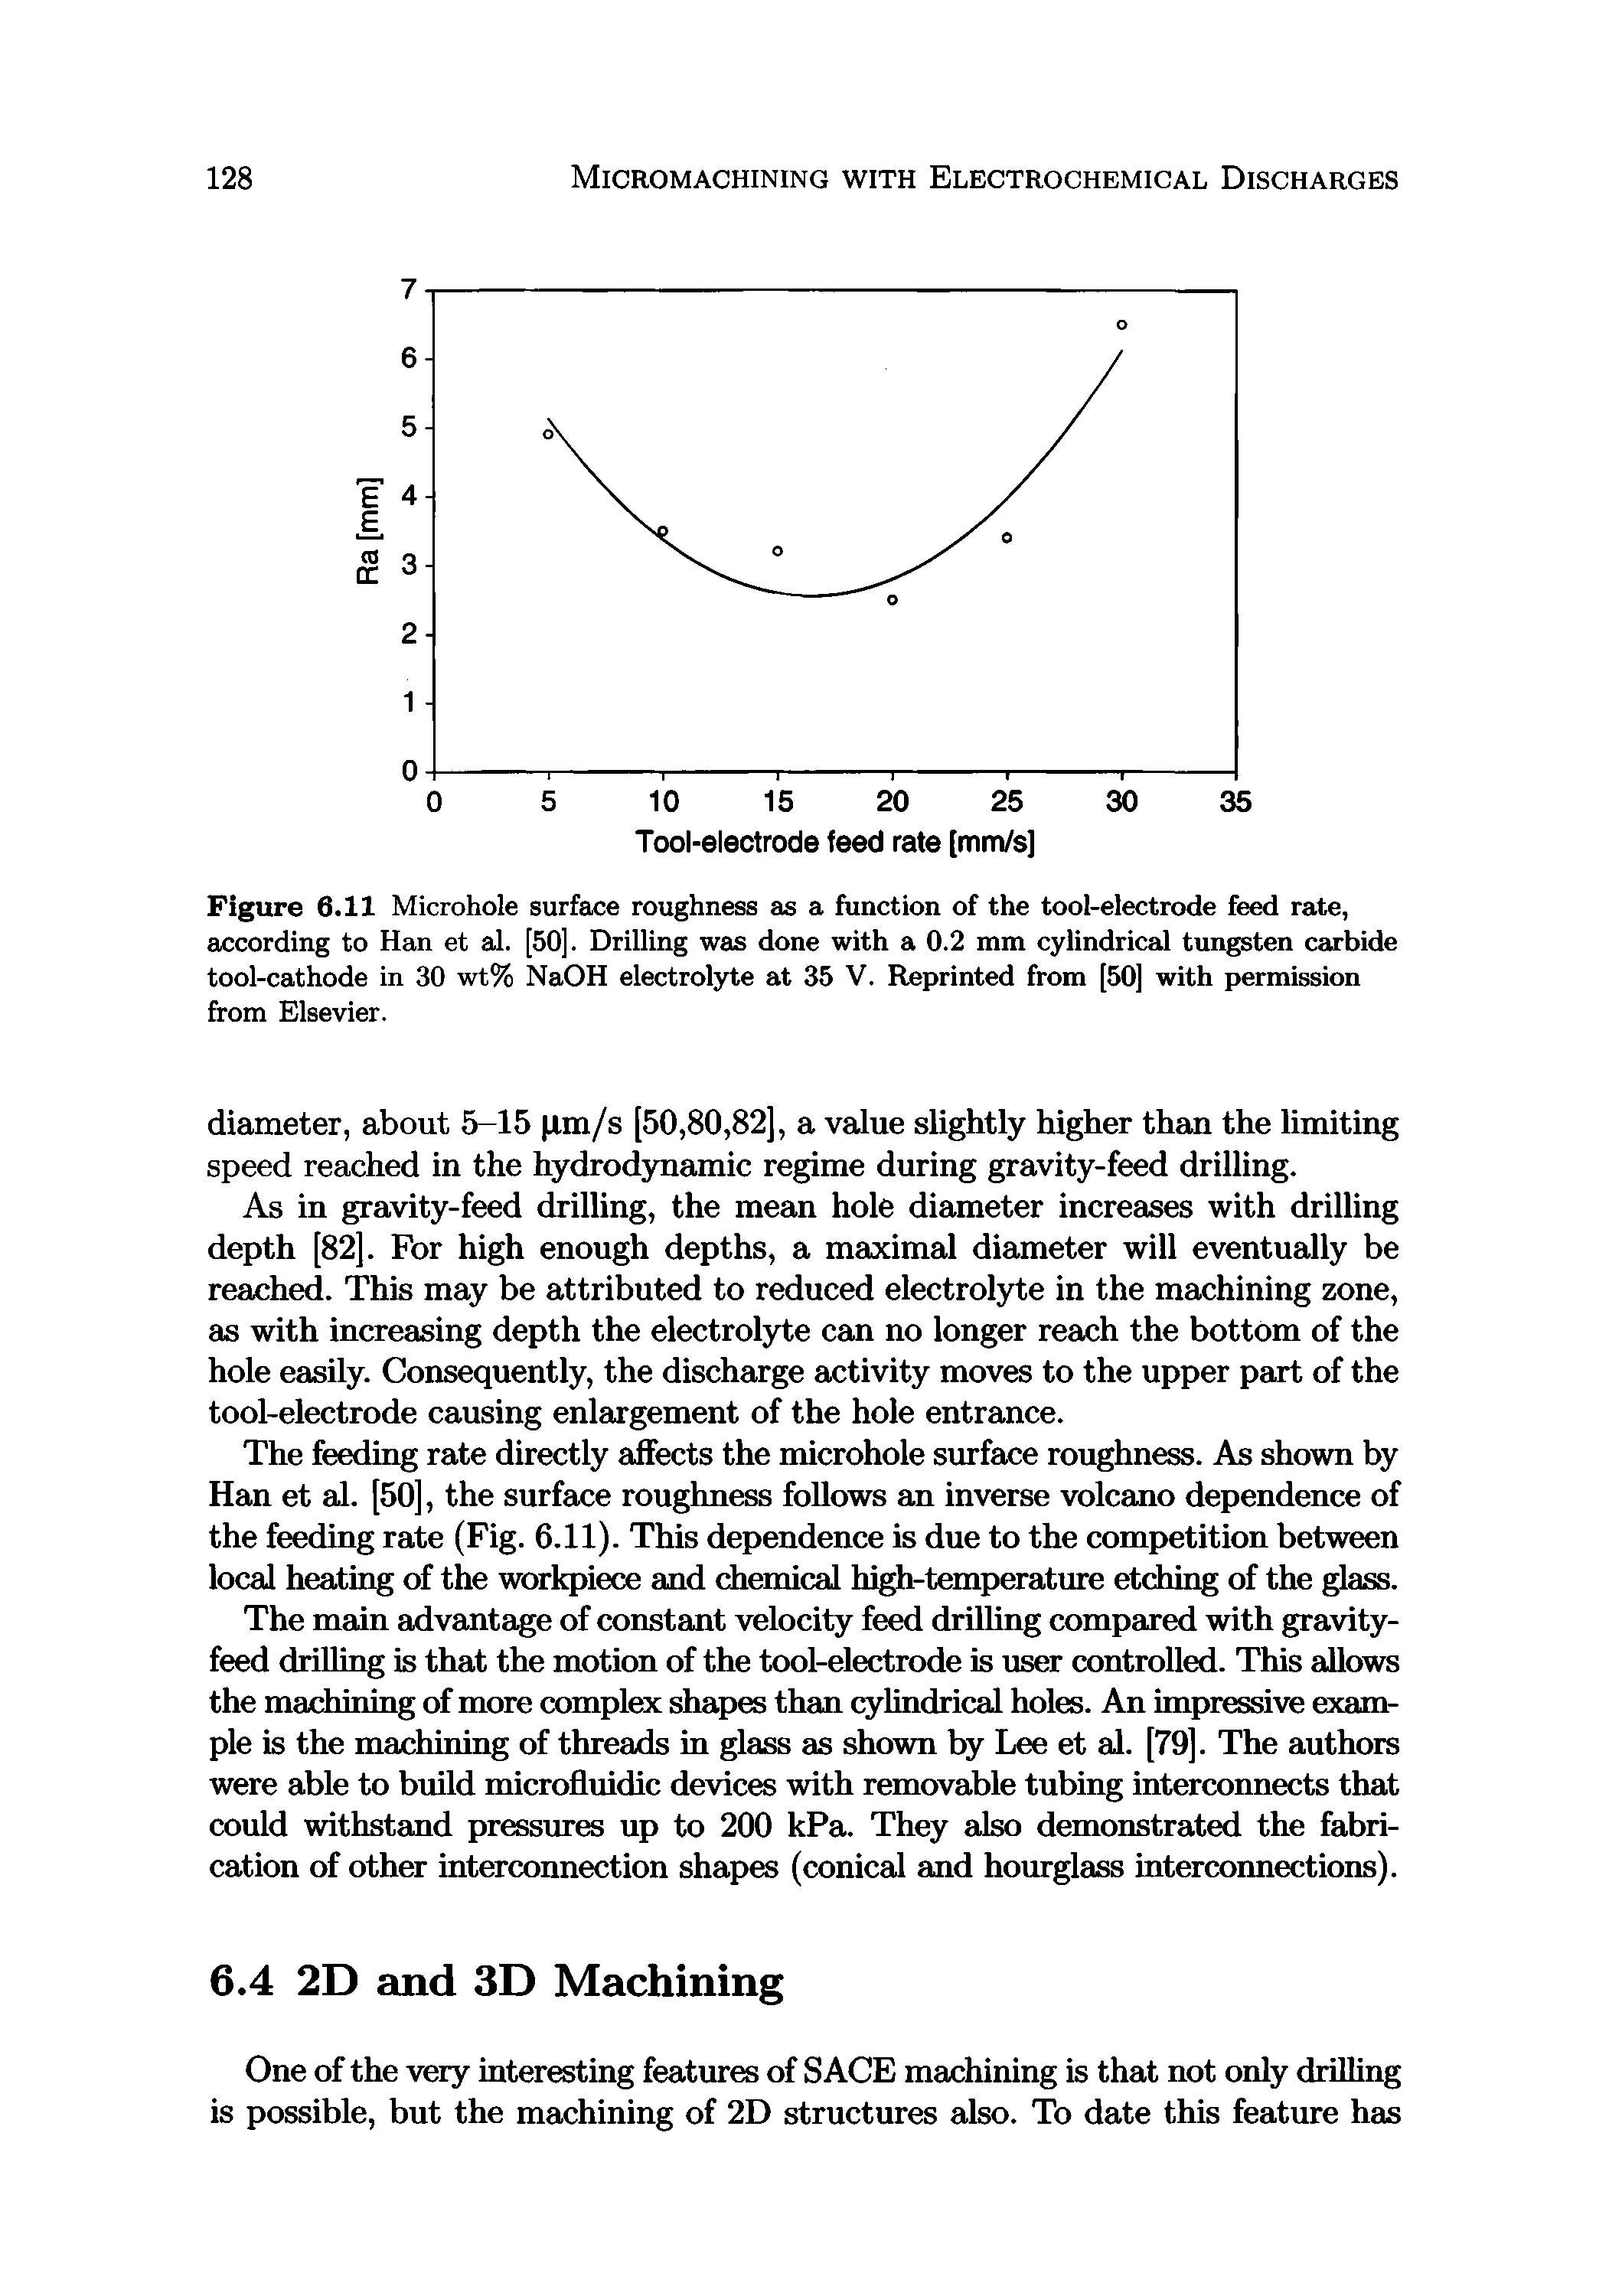 Figure 6.11 Microhole surface roughness as a function of the tool-electrode feed rate, according to Han et al. [50]. Drilling was done with a 0.2 mm cylindrical tungsten carbide tool-cathode in 30 wt% NaOH electrolyte at 35 V. Reprinted from [50] with permission from Elsevier.